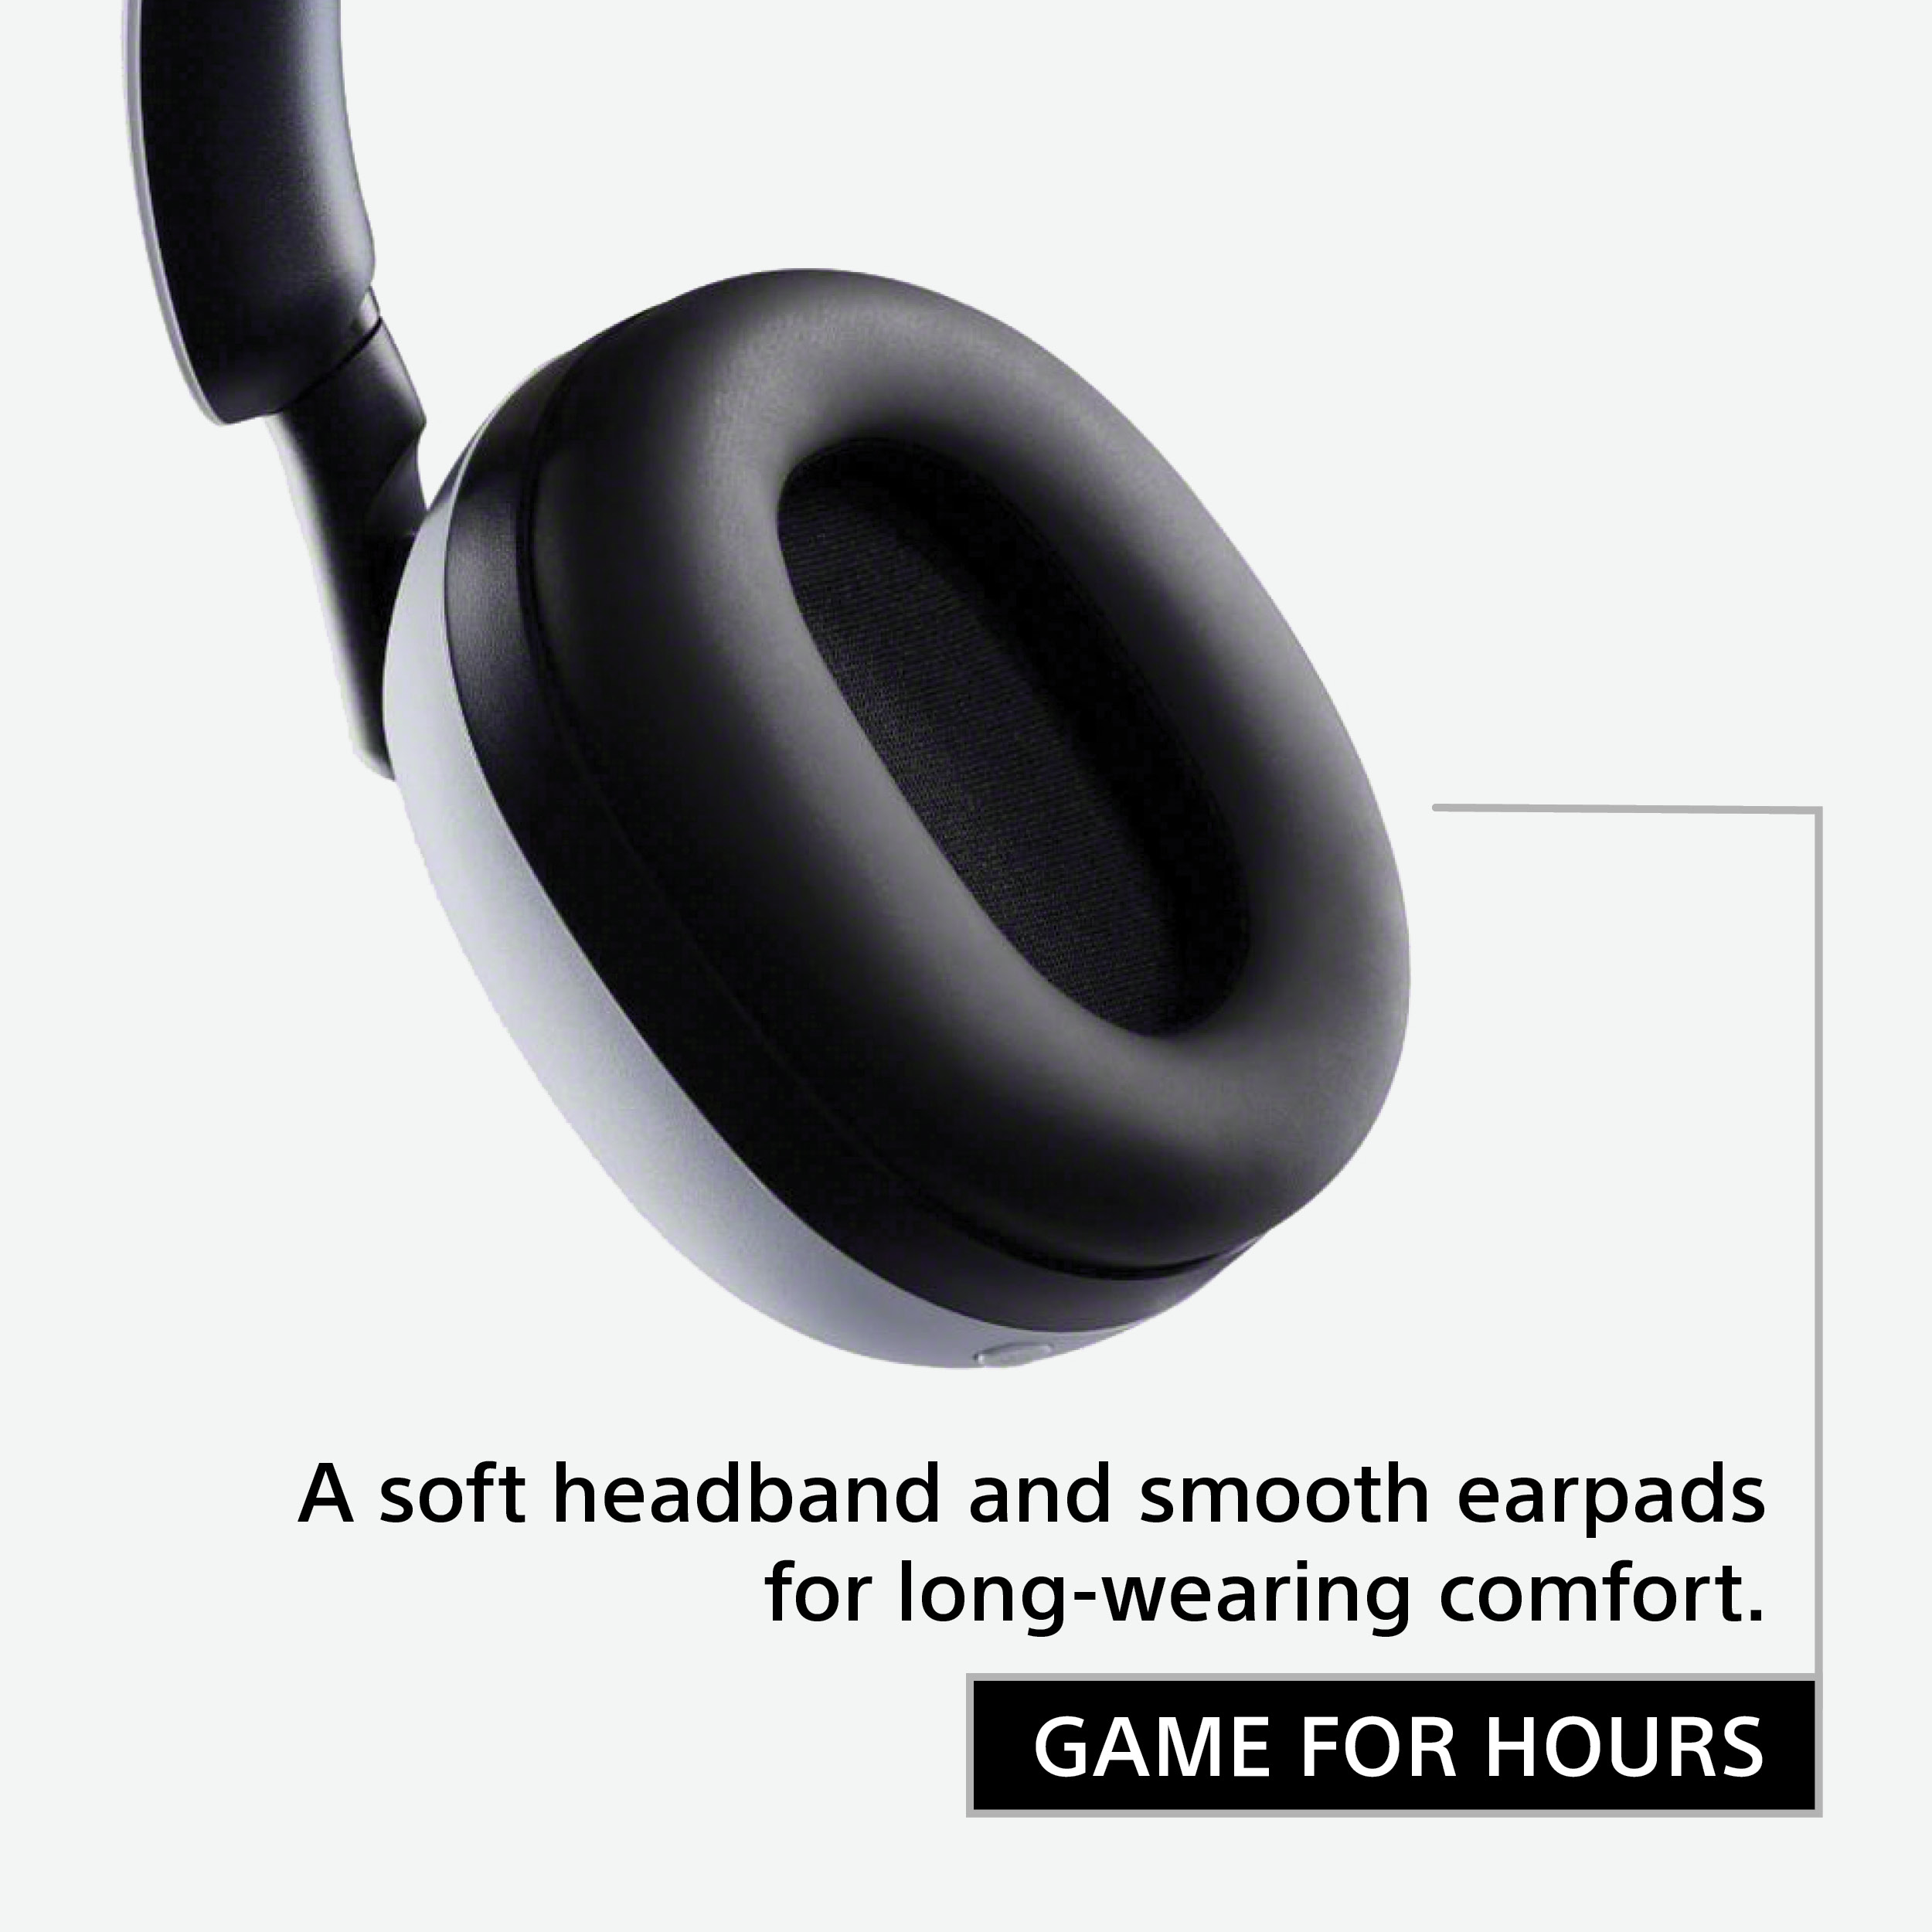 Sony INZONE H9 Wireless Noise Canceling Gaming Headset, Over-ear Headphones with 360 Spatial Sound, WH-G900N - image 4 of 14